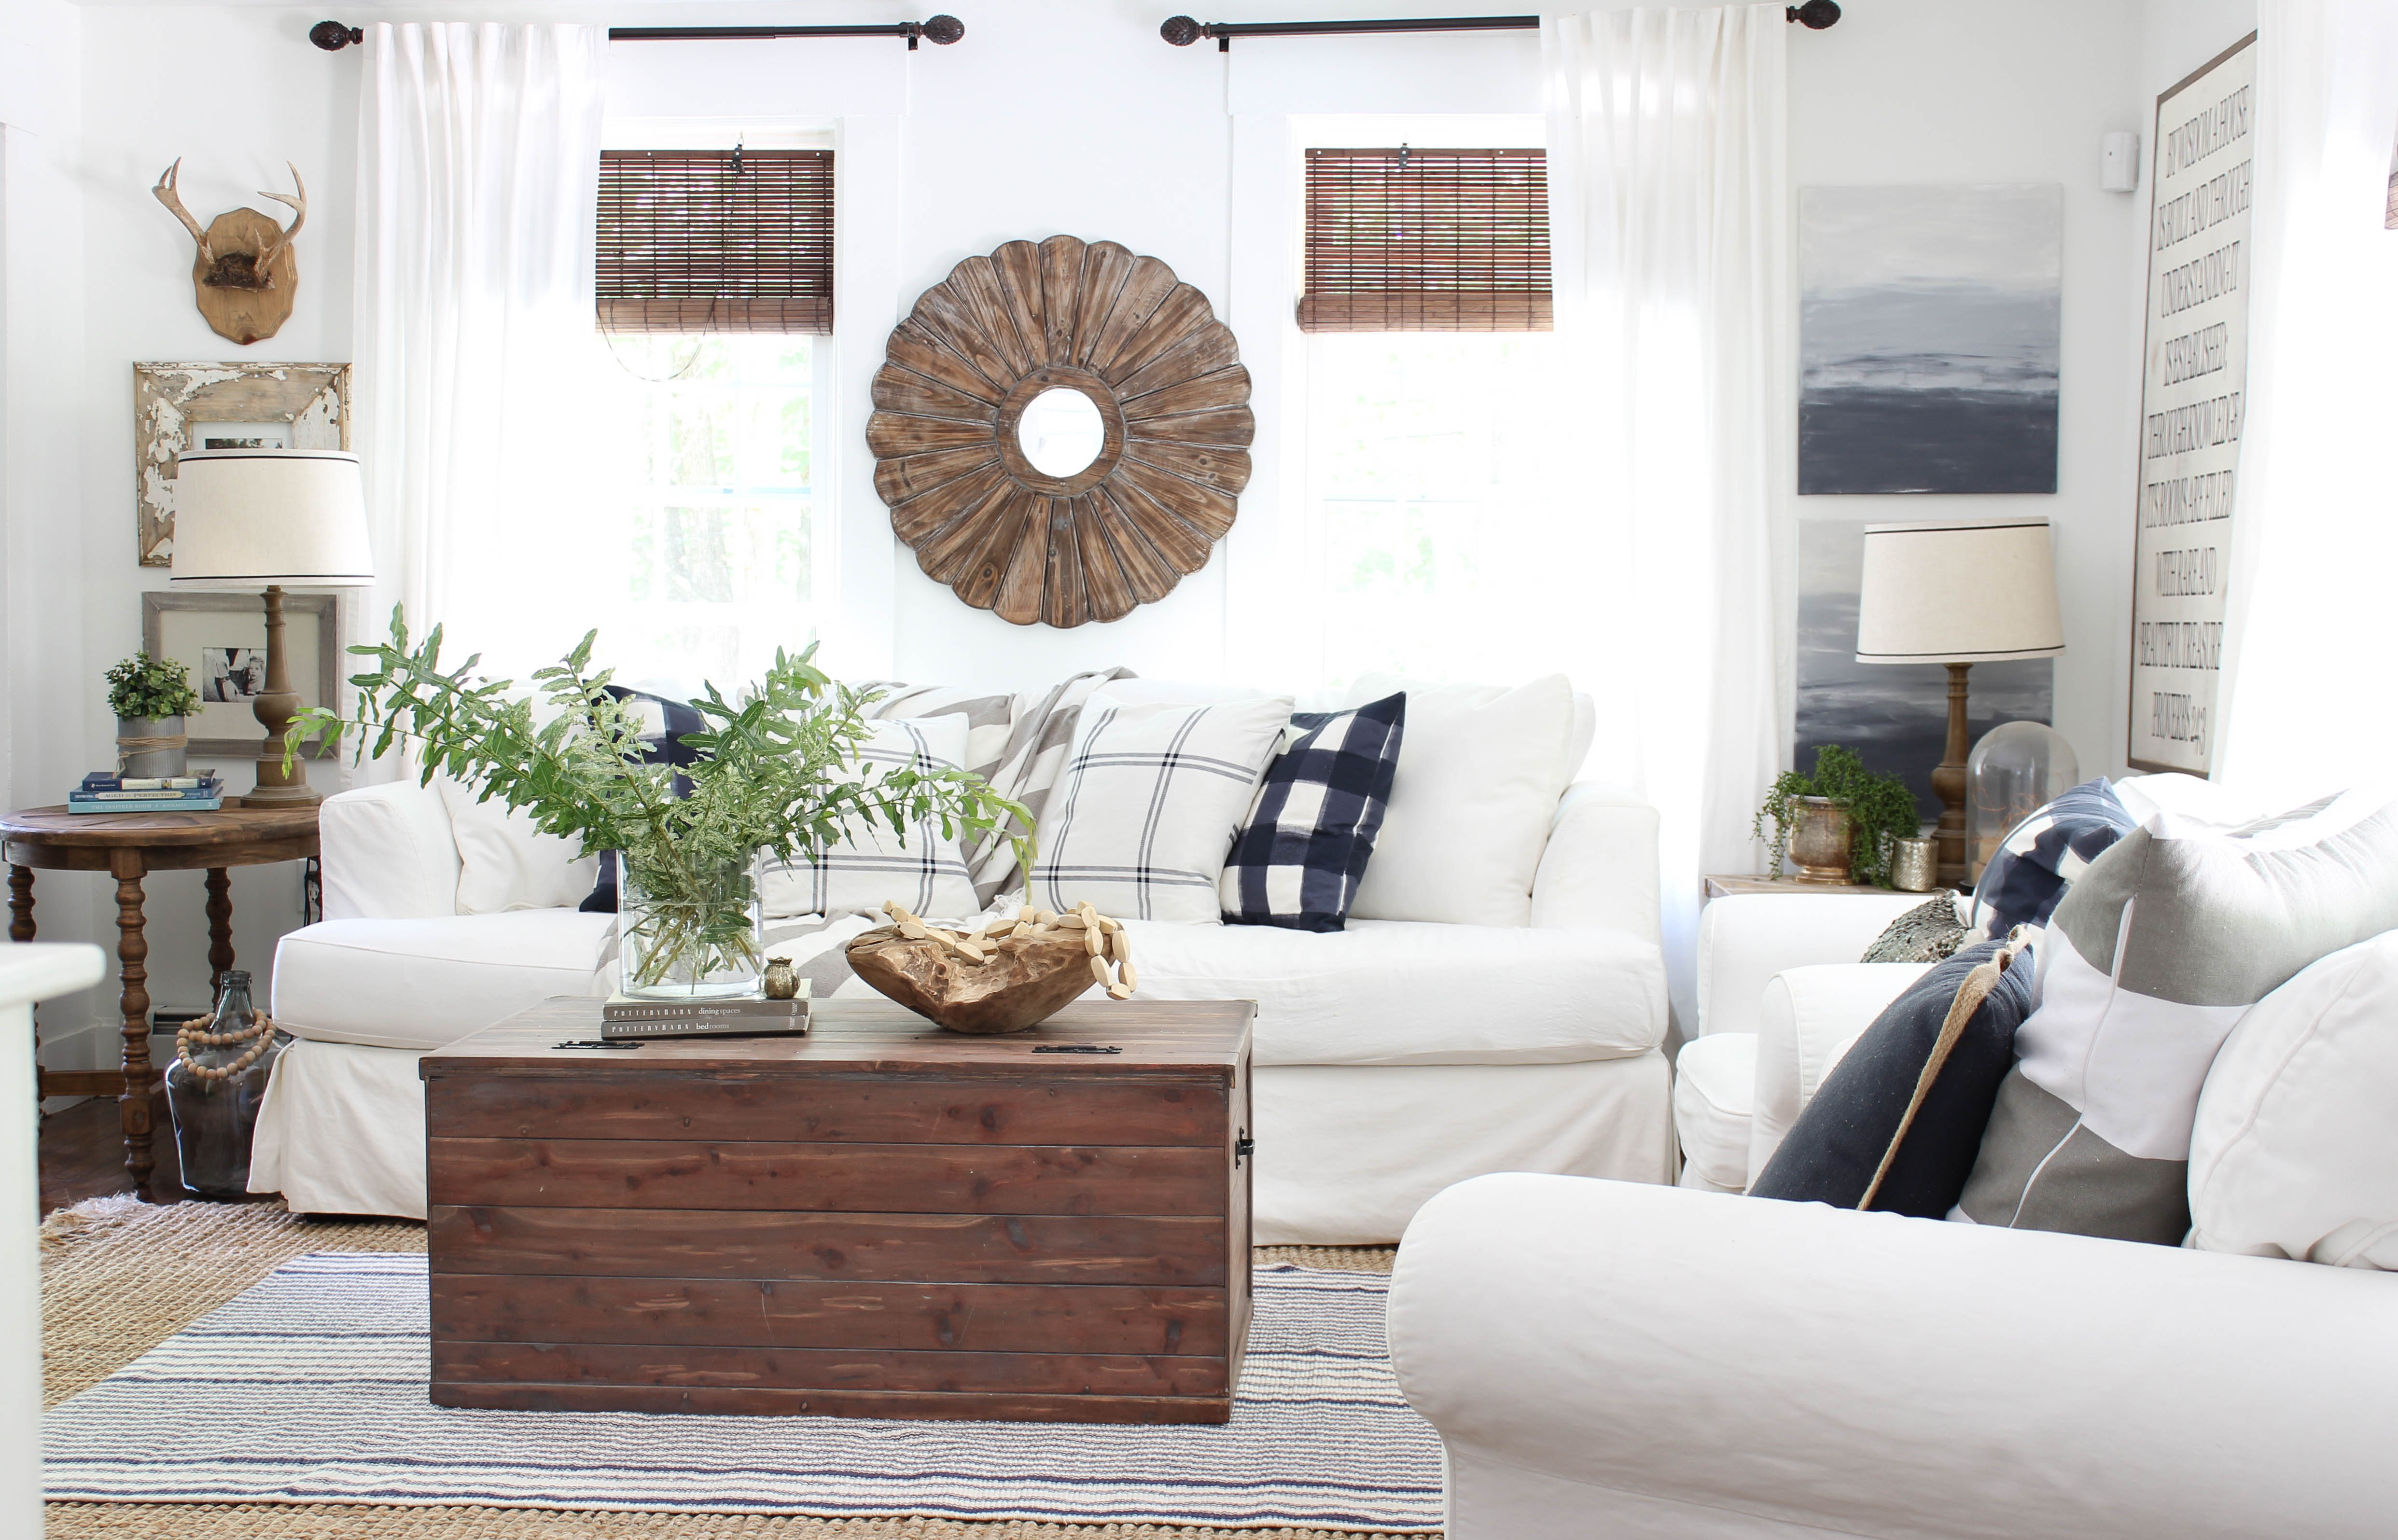 Home Tour with Wayfair - Rooms For Rent blog